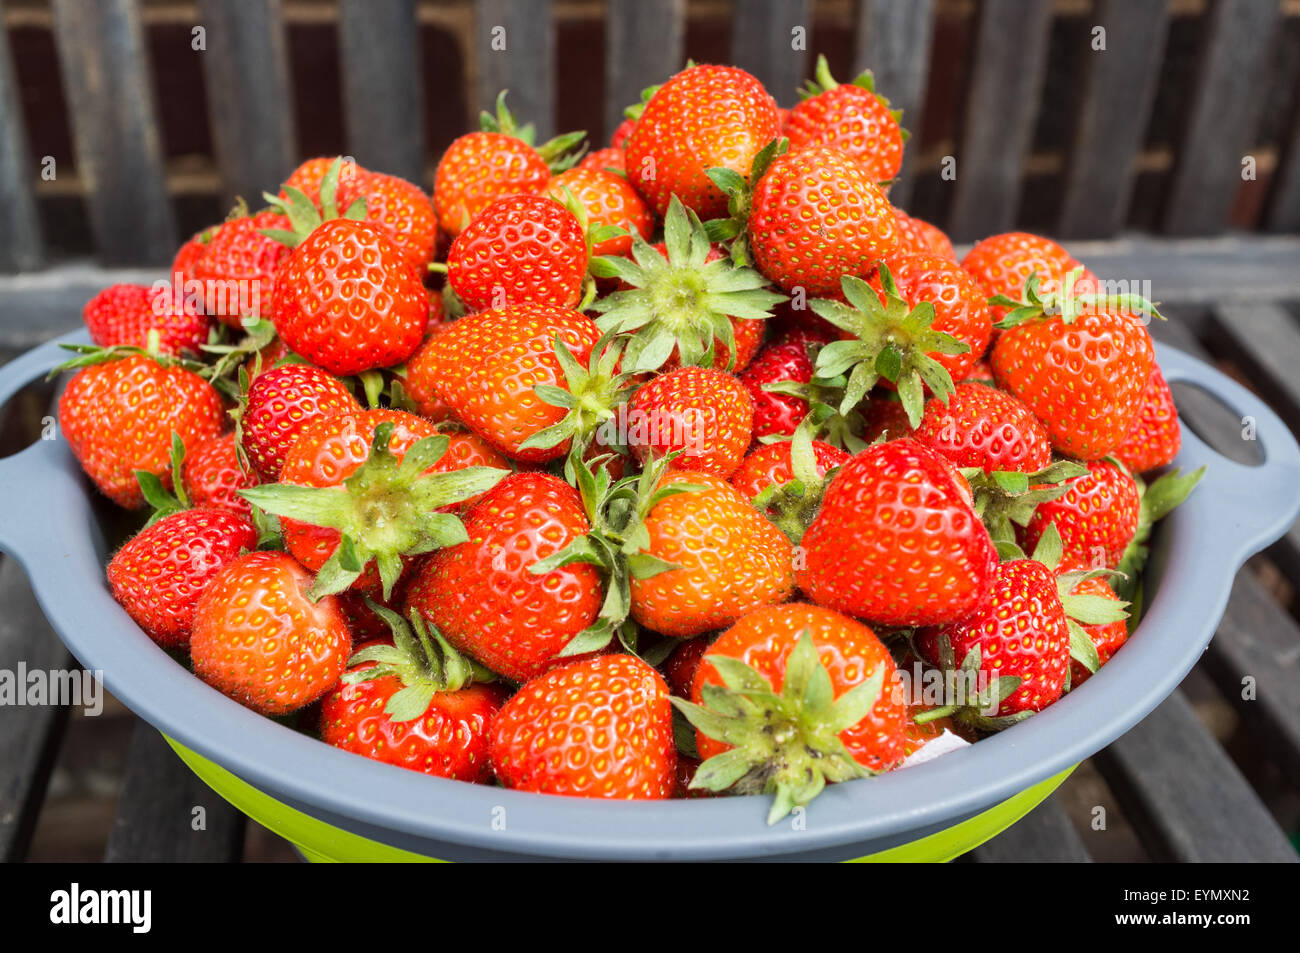 A colander of strawberries on a wooden garden seat after harvesting in a garden. Stock Photo